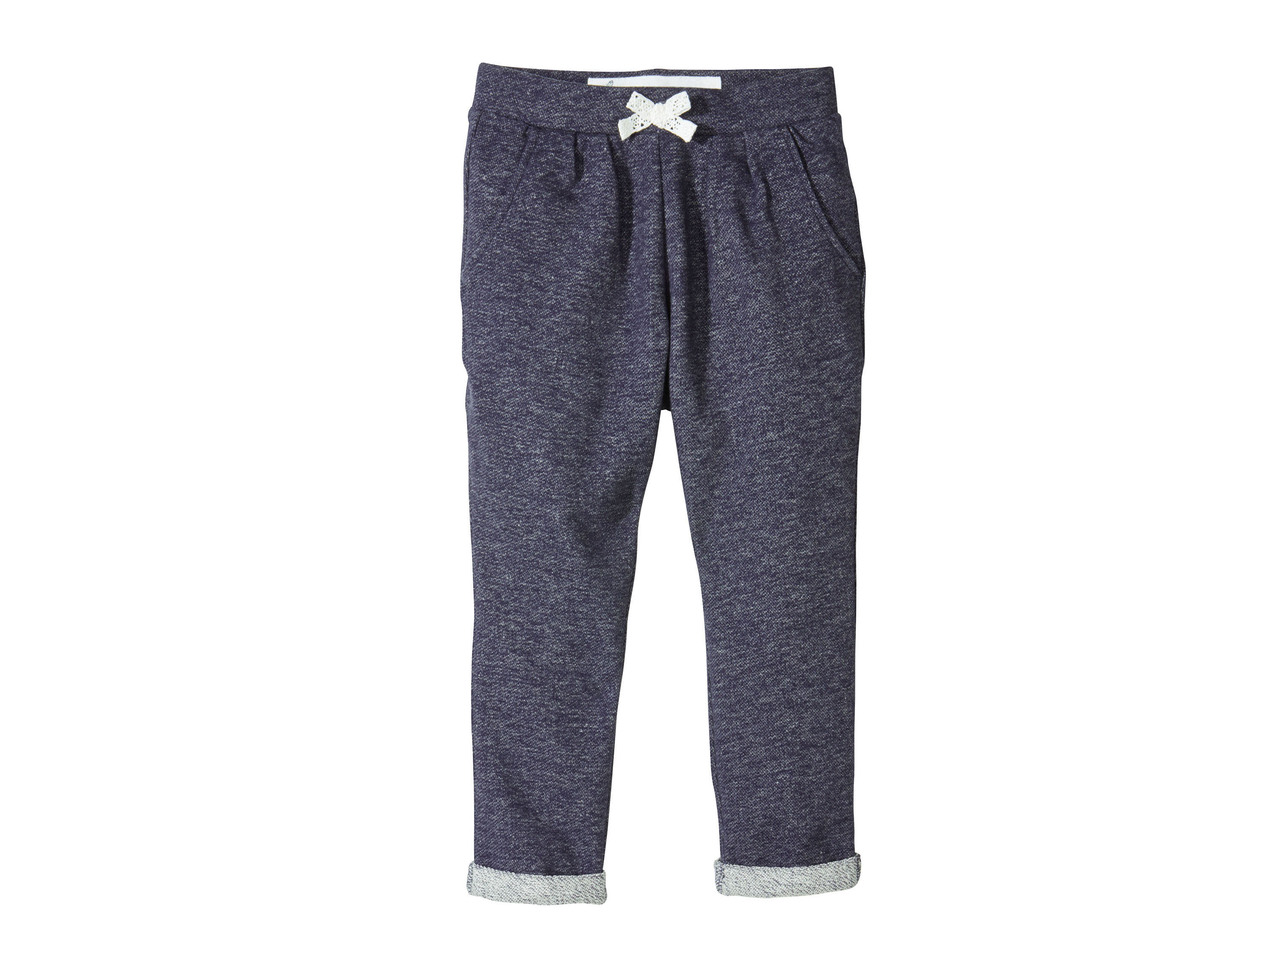 Girls' Sports Trousers